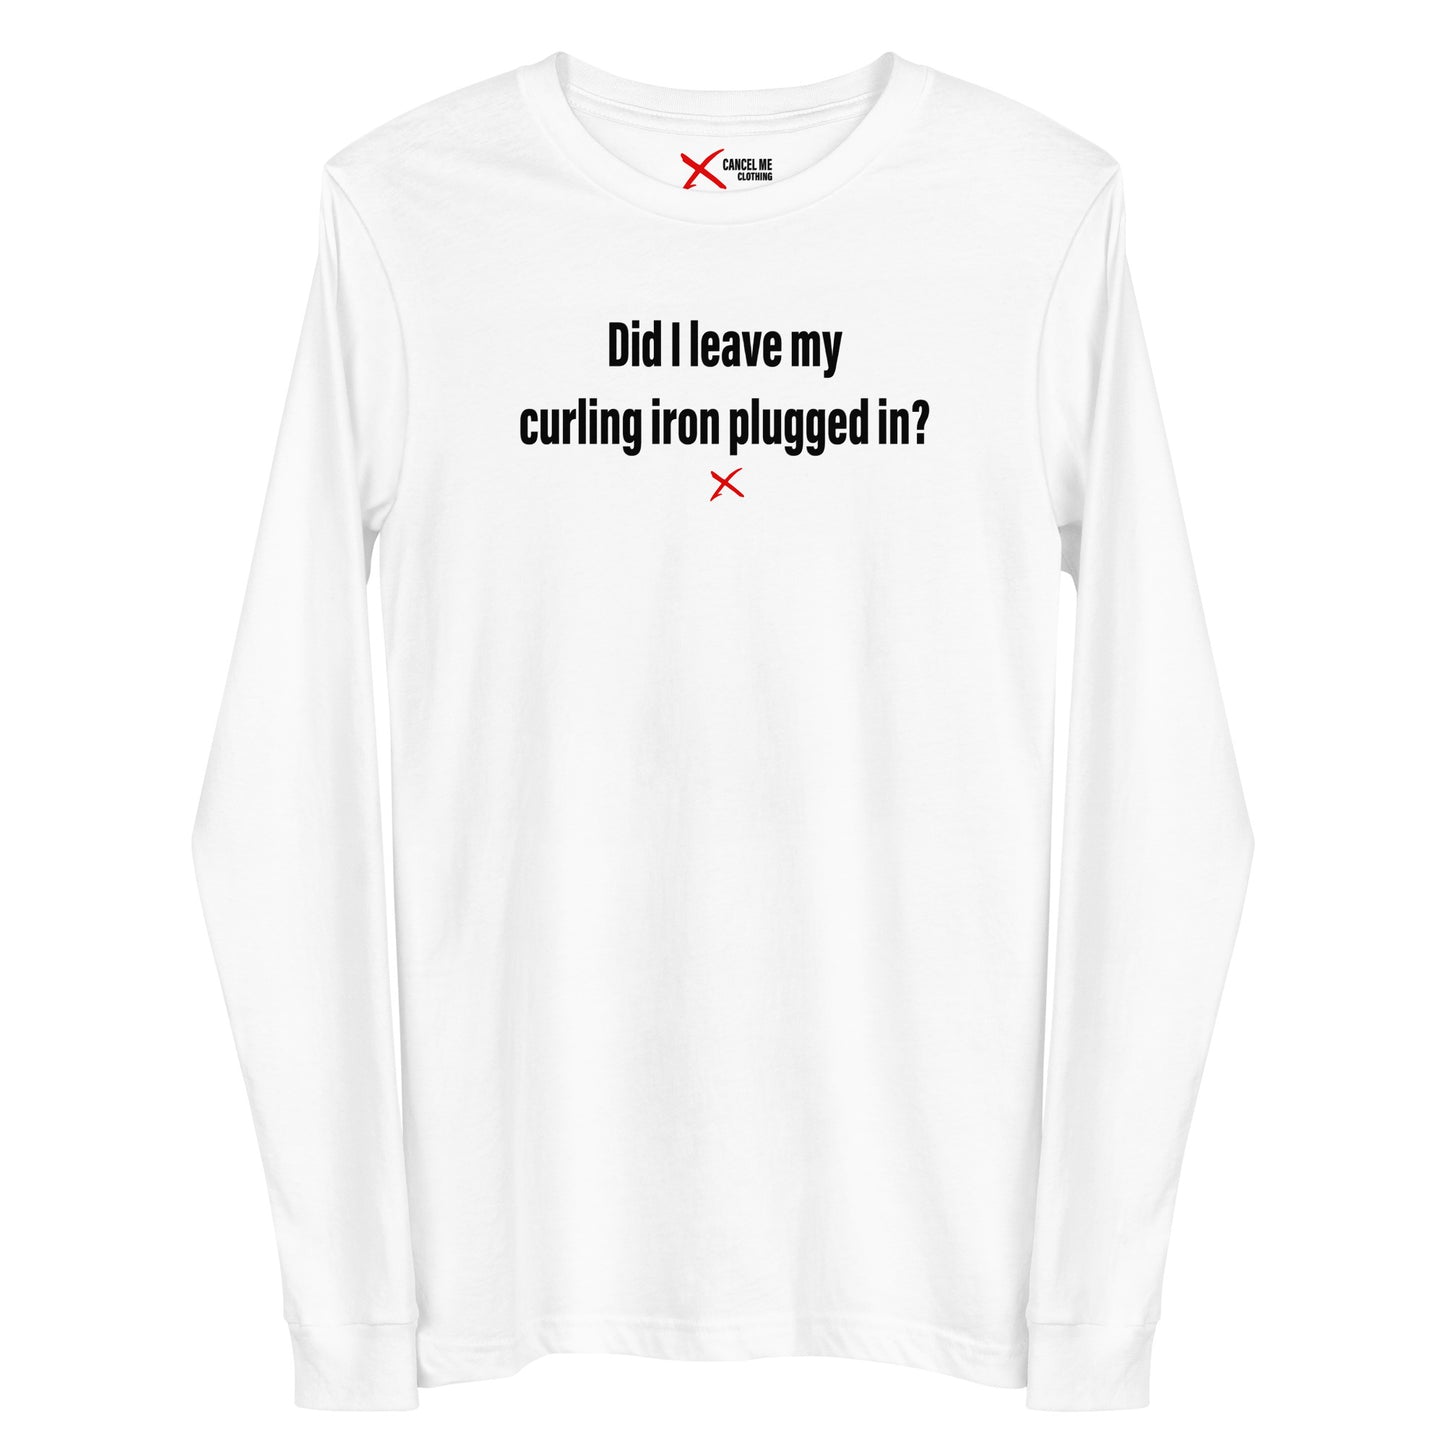 Did I leave my curling iron plugged in? - Longsleeve